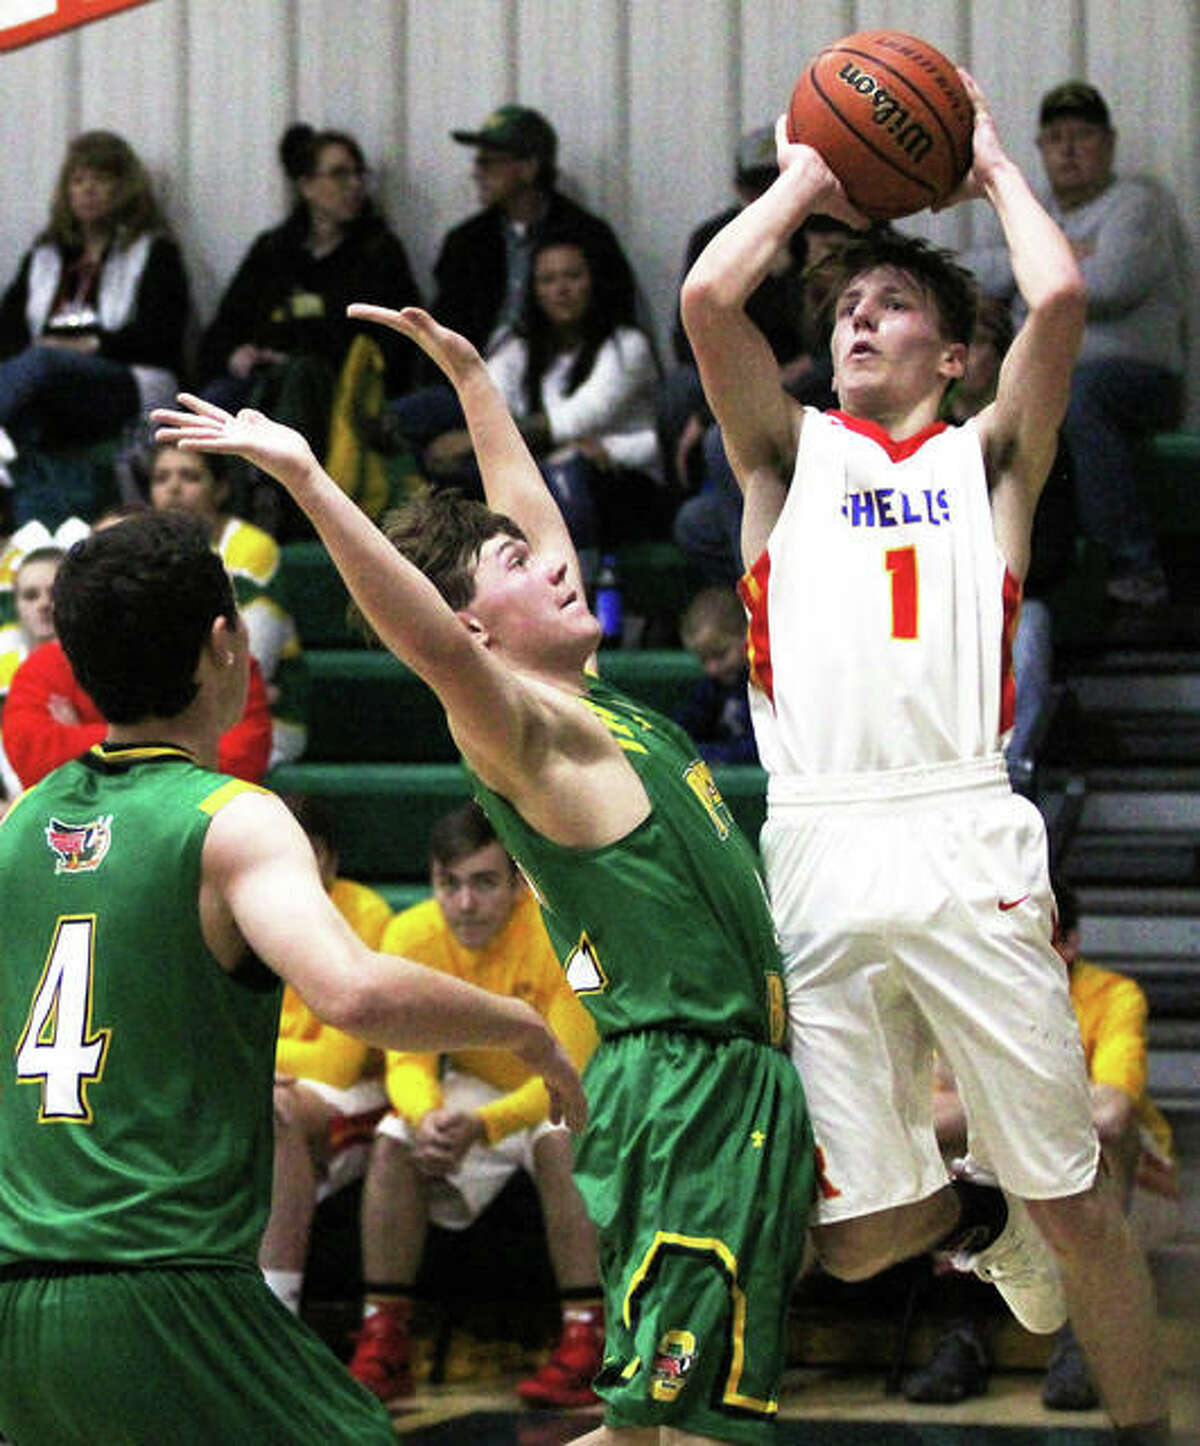 Roxana’s Andrew Beckman (right) pulls up to shoot over Southwestern’s E.J. Kahl (middle) during a Shells’ win at the Metro-East Lutheran Tournament last Friday at Hooks Gym in Edwardsville.